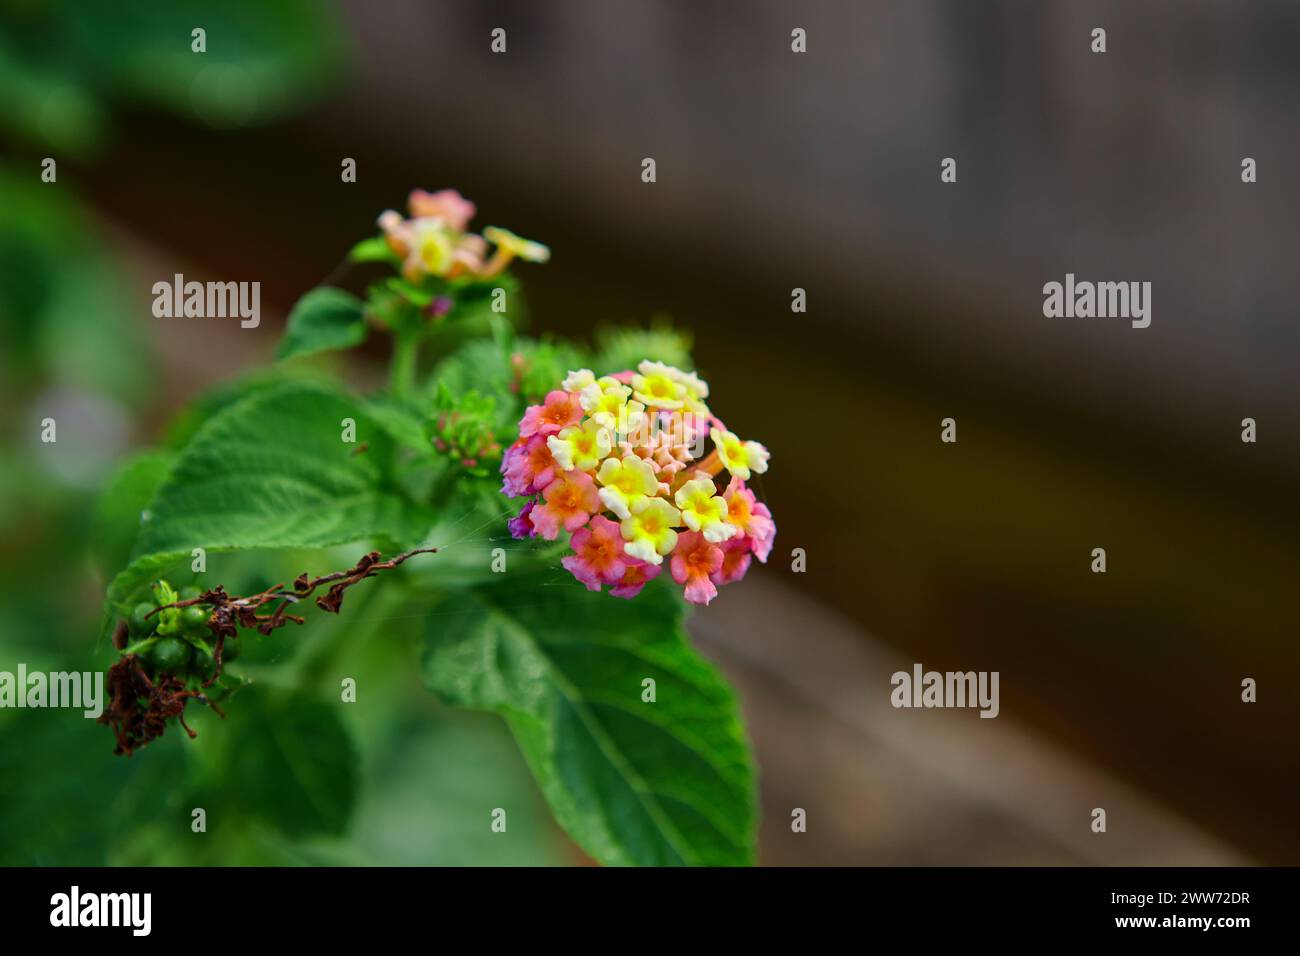 Close-up of Lantana flower blooming in garden Stock Photo